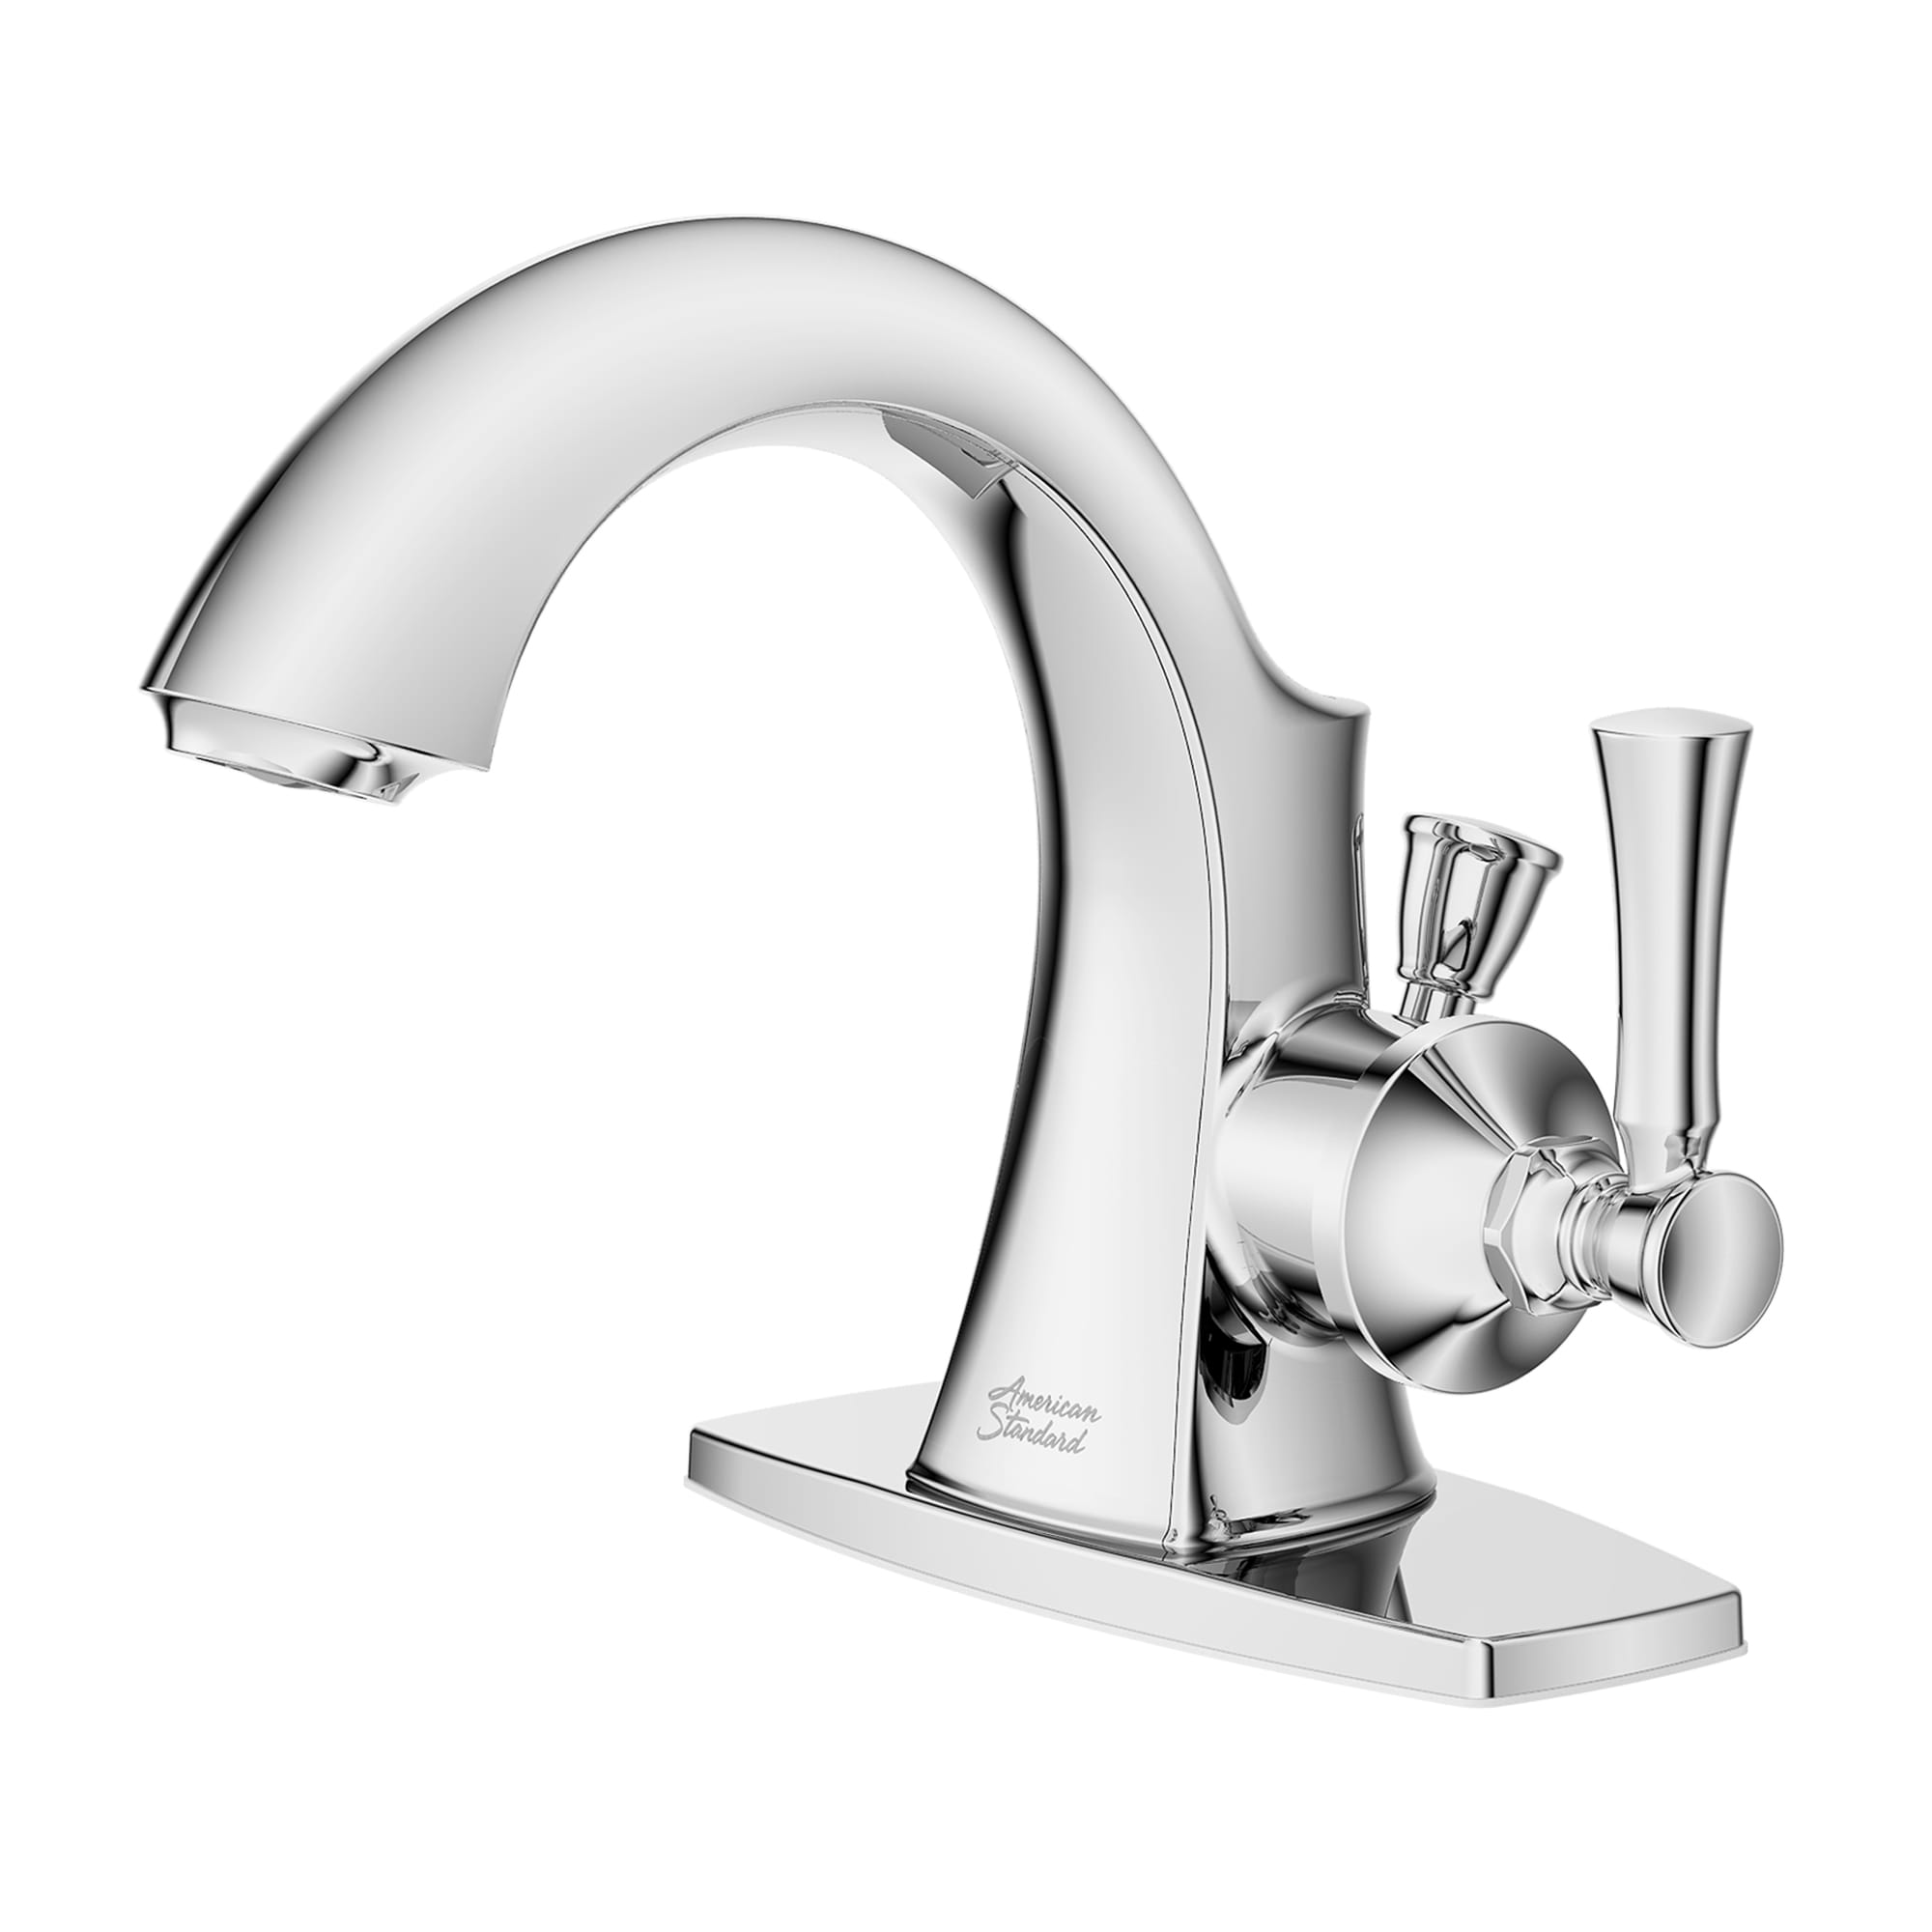 Chancellor 4 In Centerset Single Handle Bathroom Faucet 12 GPM with Lever Handle CHROME